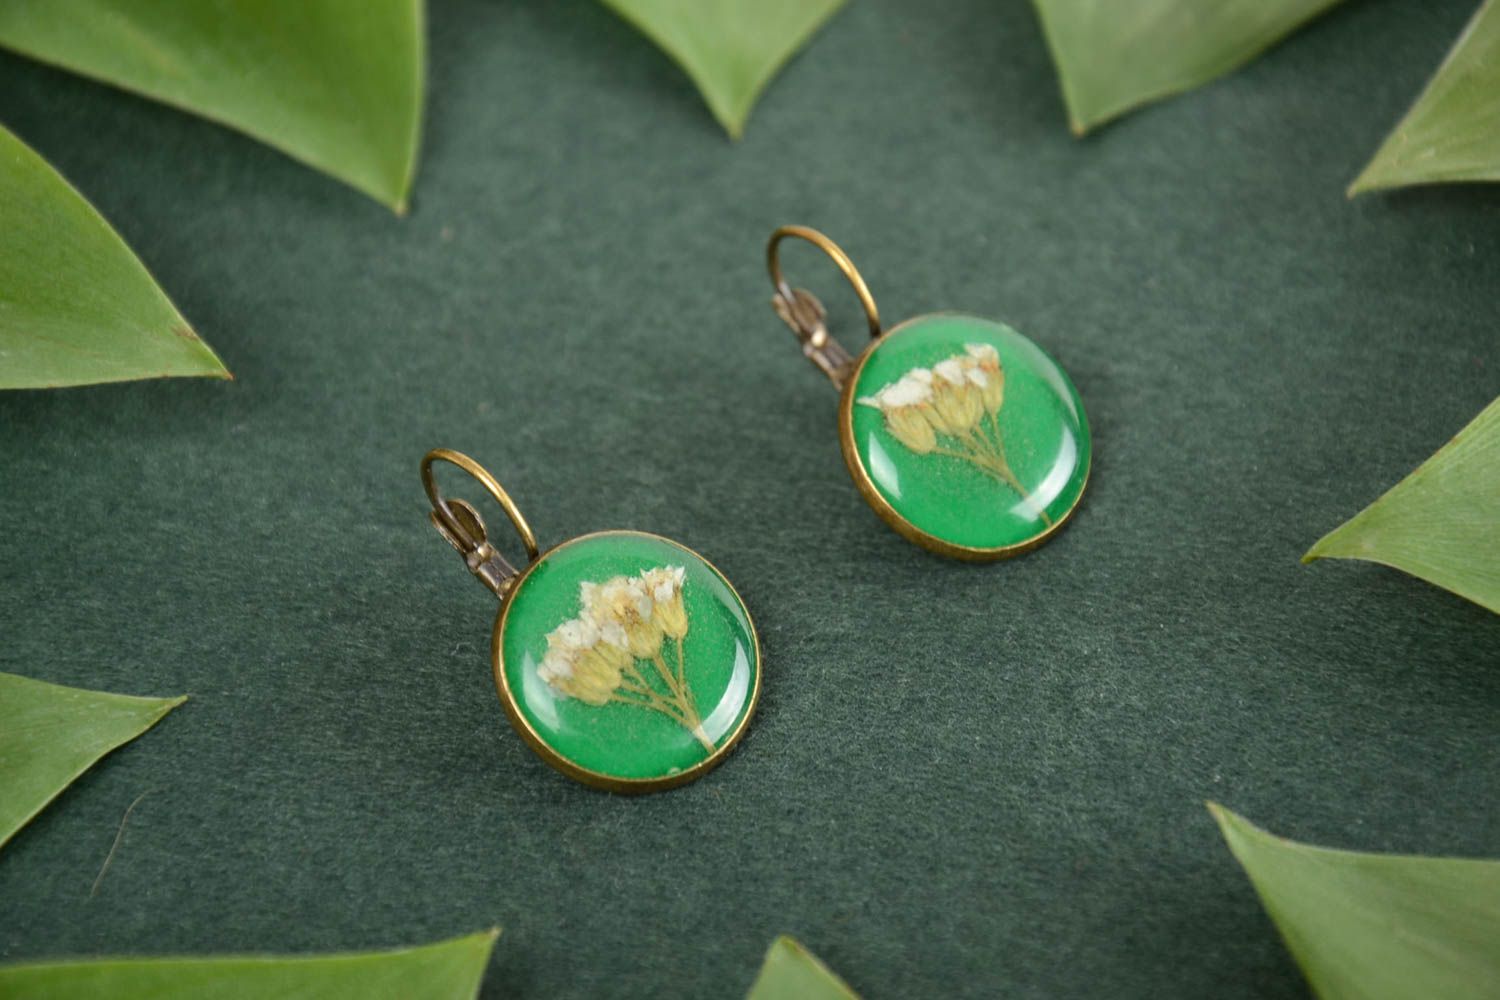 Homemade round green epoxy resin earrings with beautiful flowers inside photo 1